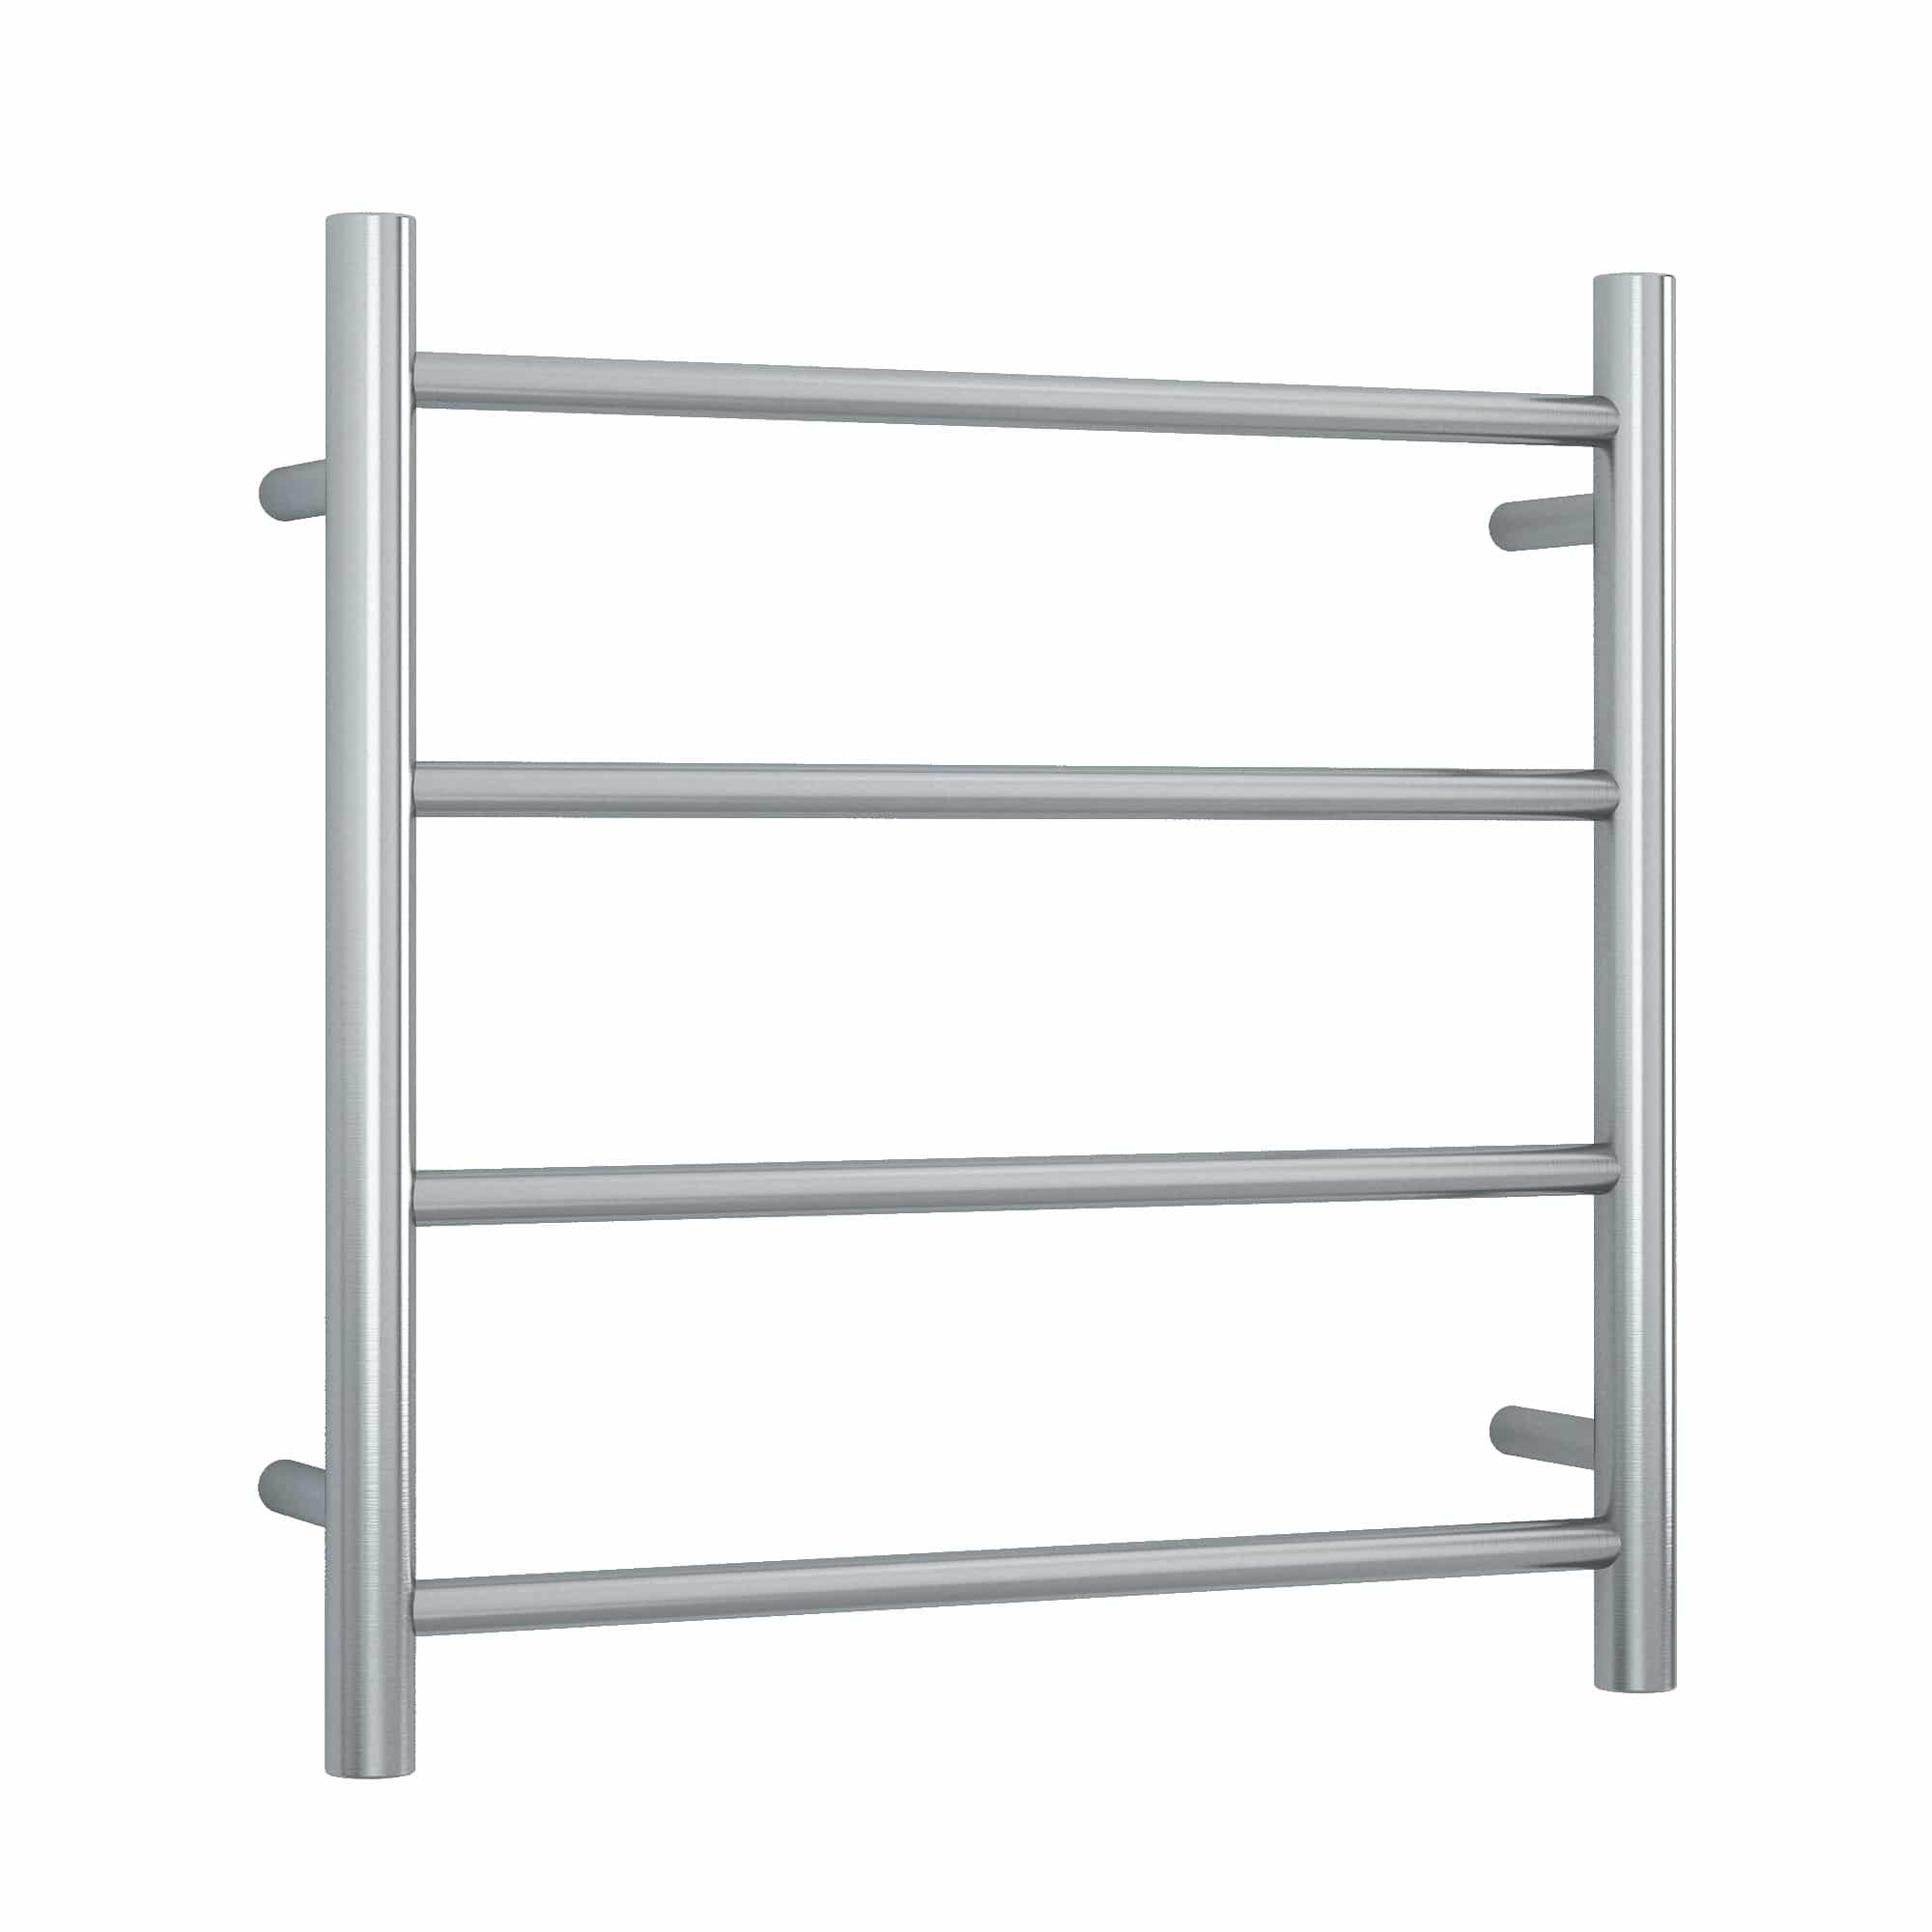 THERMOGROUP BRUSHED STRAIGHT ROUND LADDER HEATED TOWEL RAIL 550MM